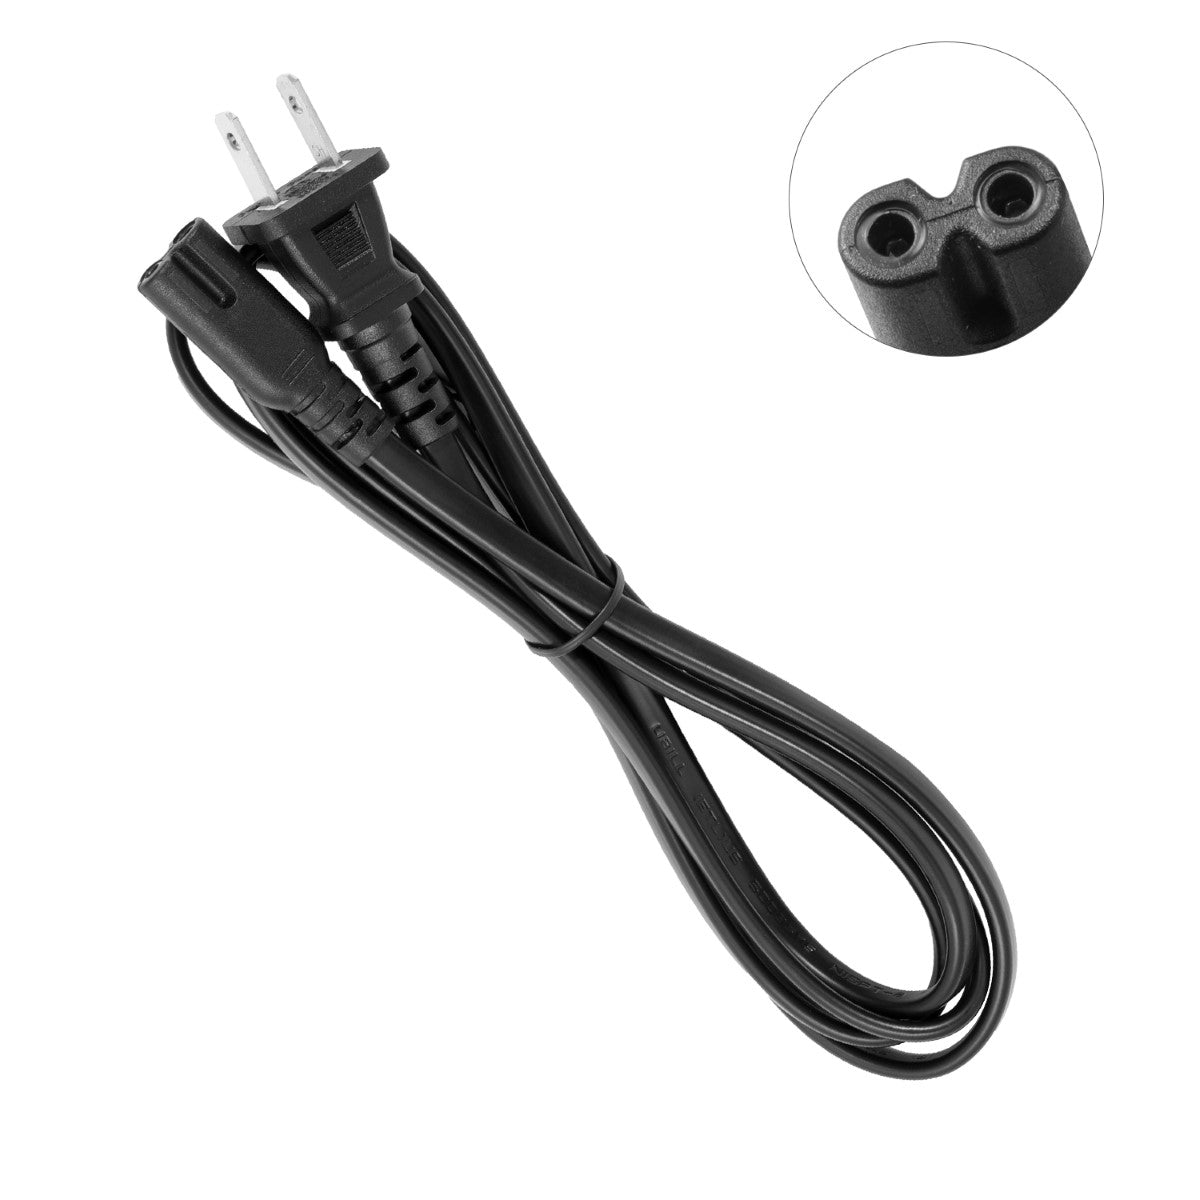 Power Cord for HP ENVY 7640 e-All-in-One Printer.